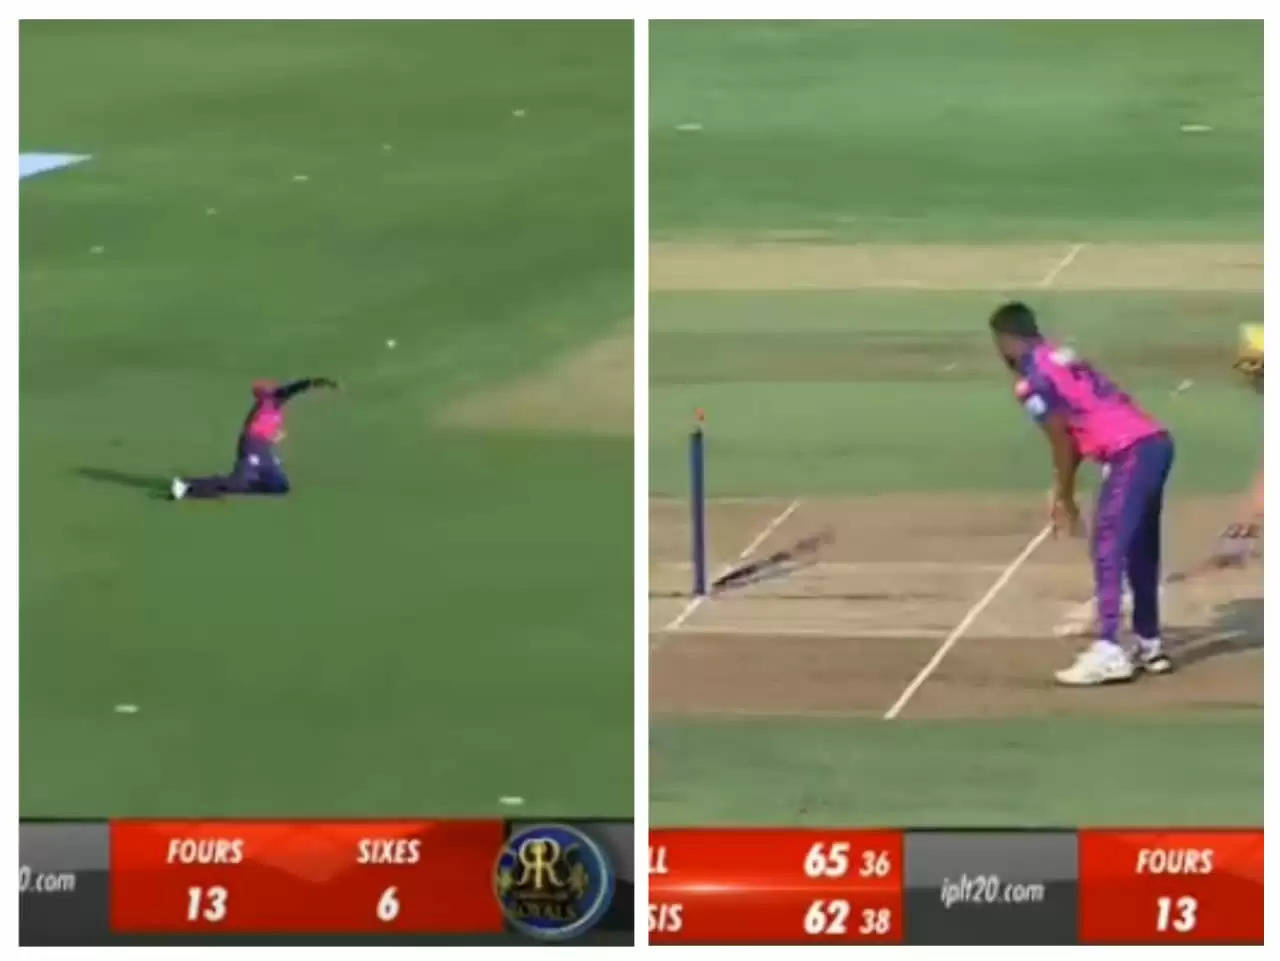 Yashasvi Jaiswal was involved in two run-outs against Royal Challengers Bangalore.